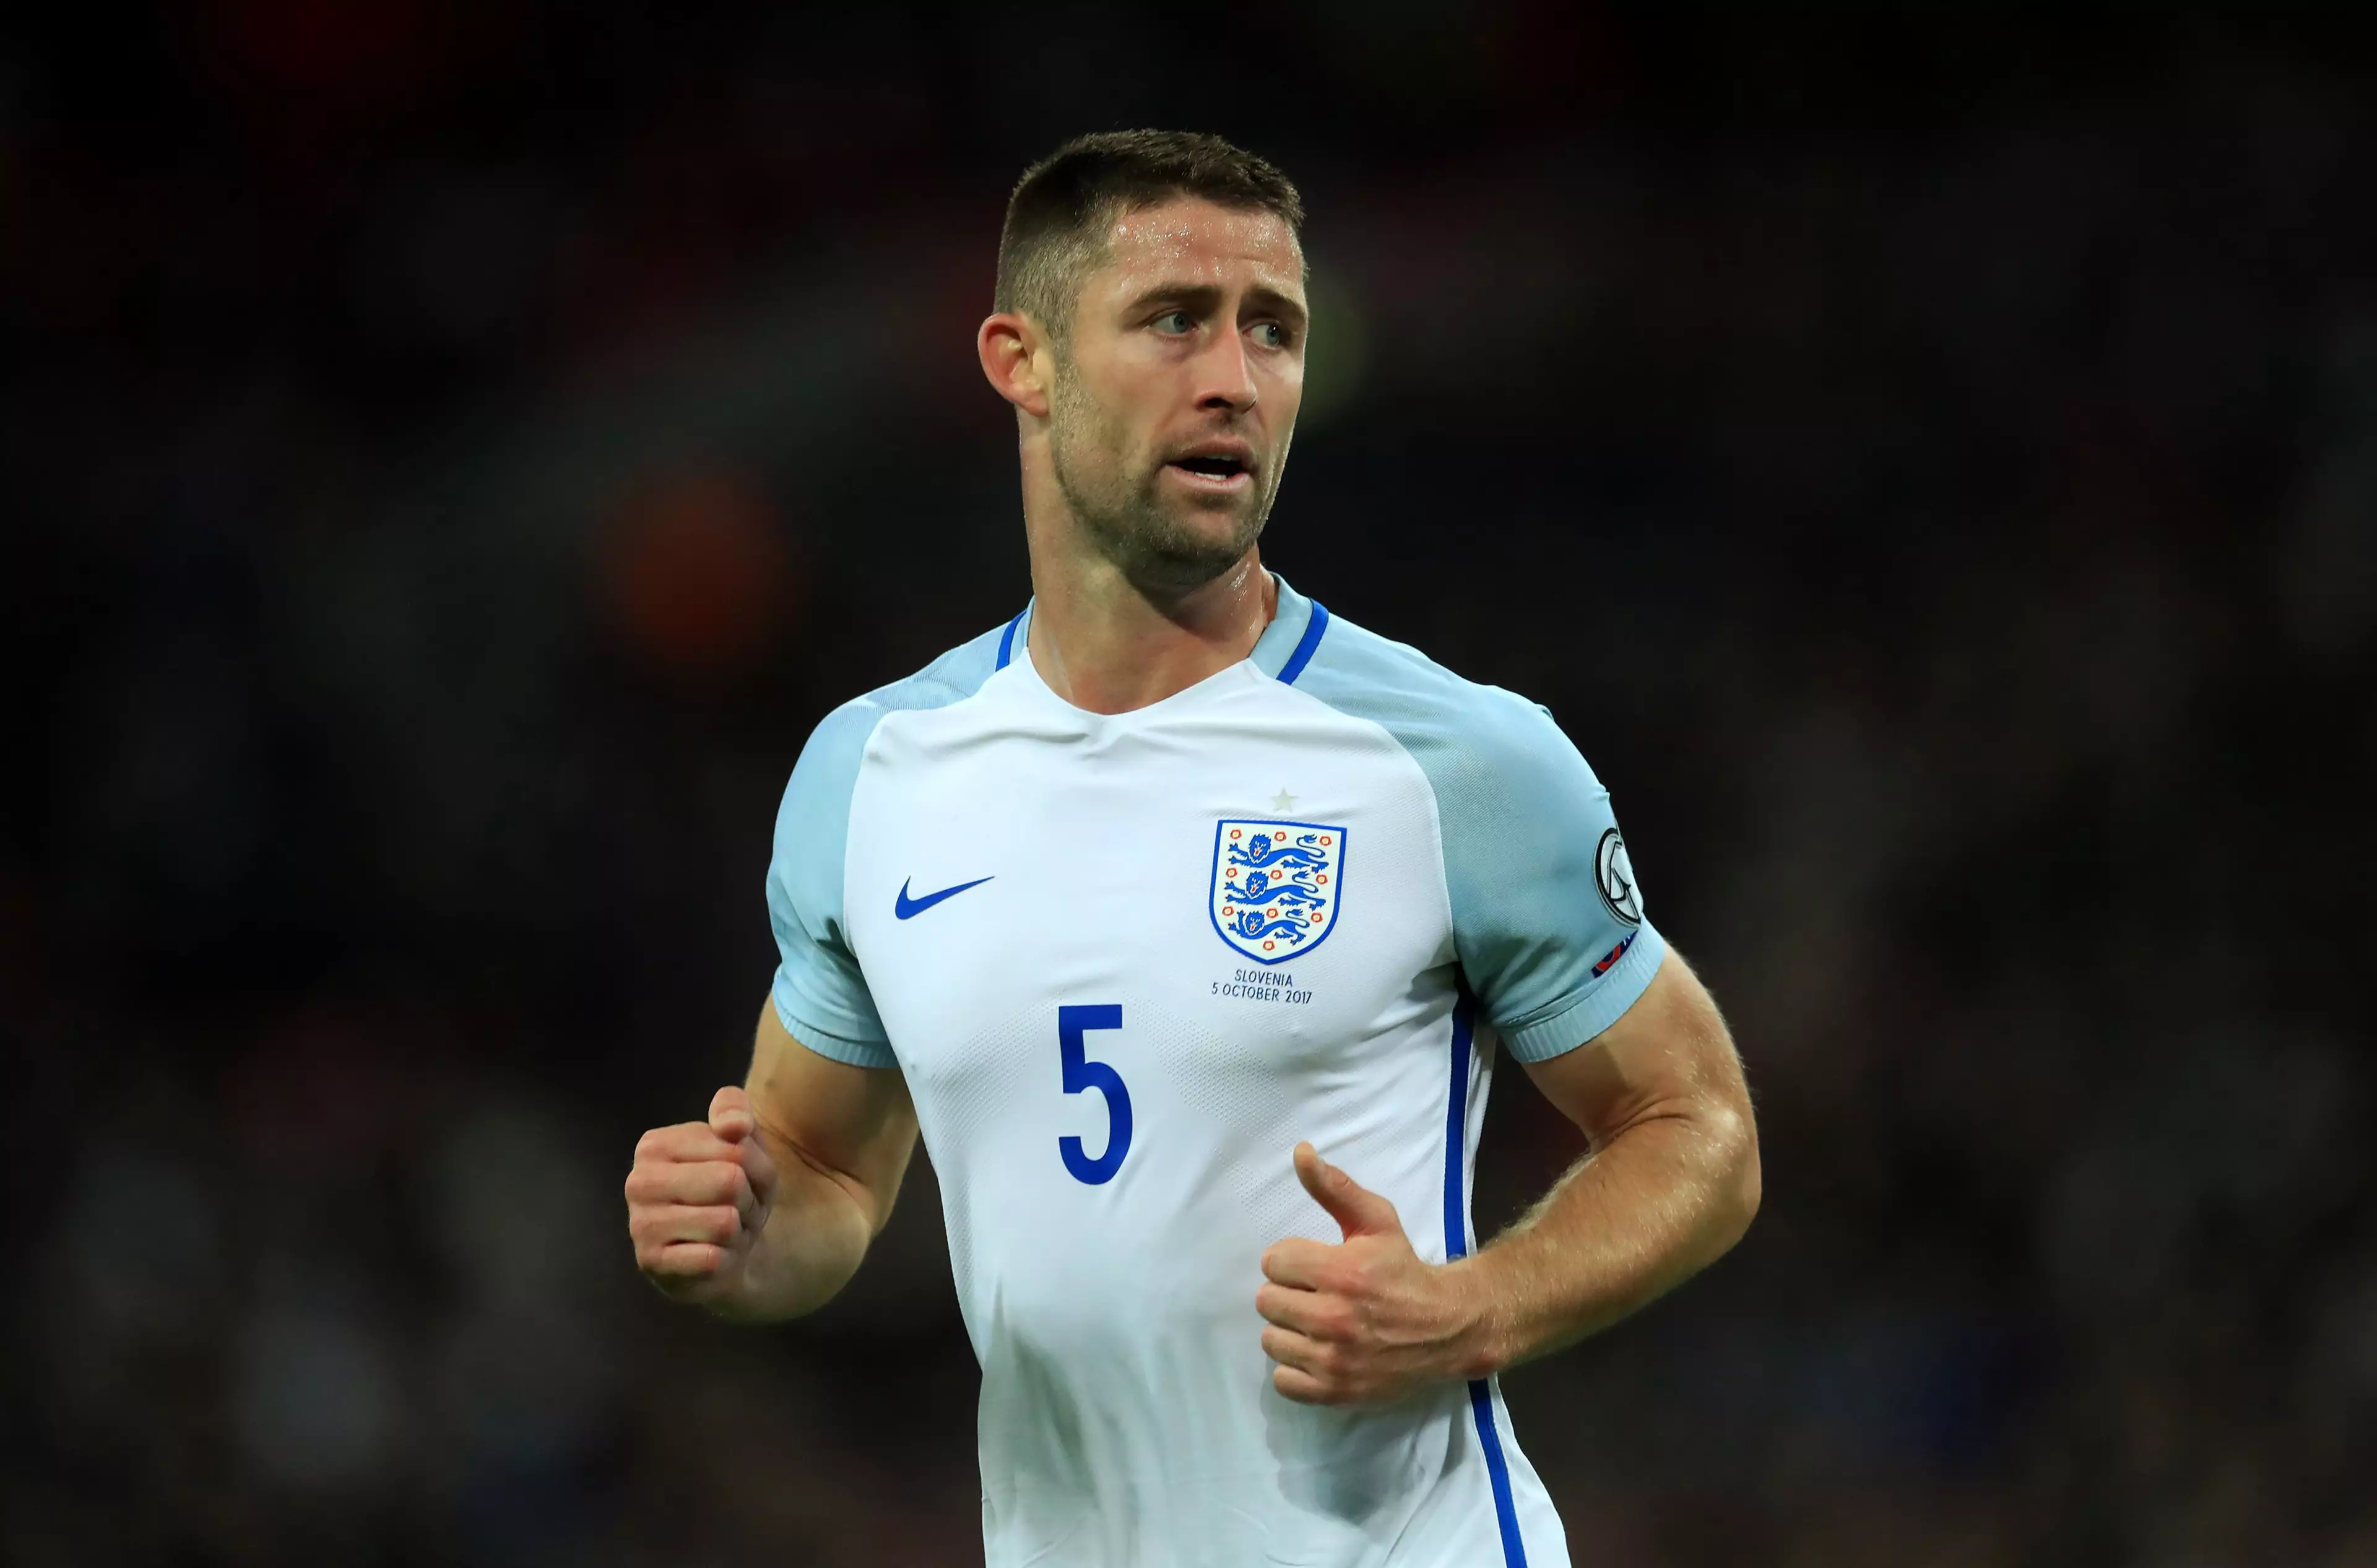 Cahill has been a regular for England. Image: PA Images.